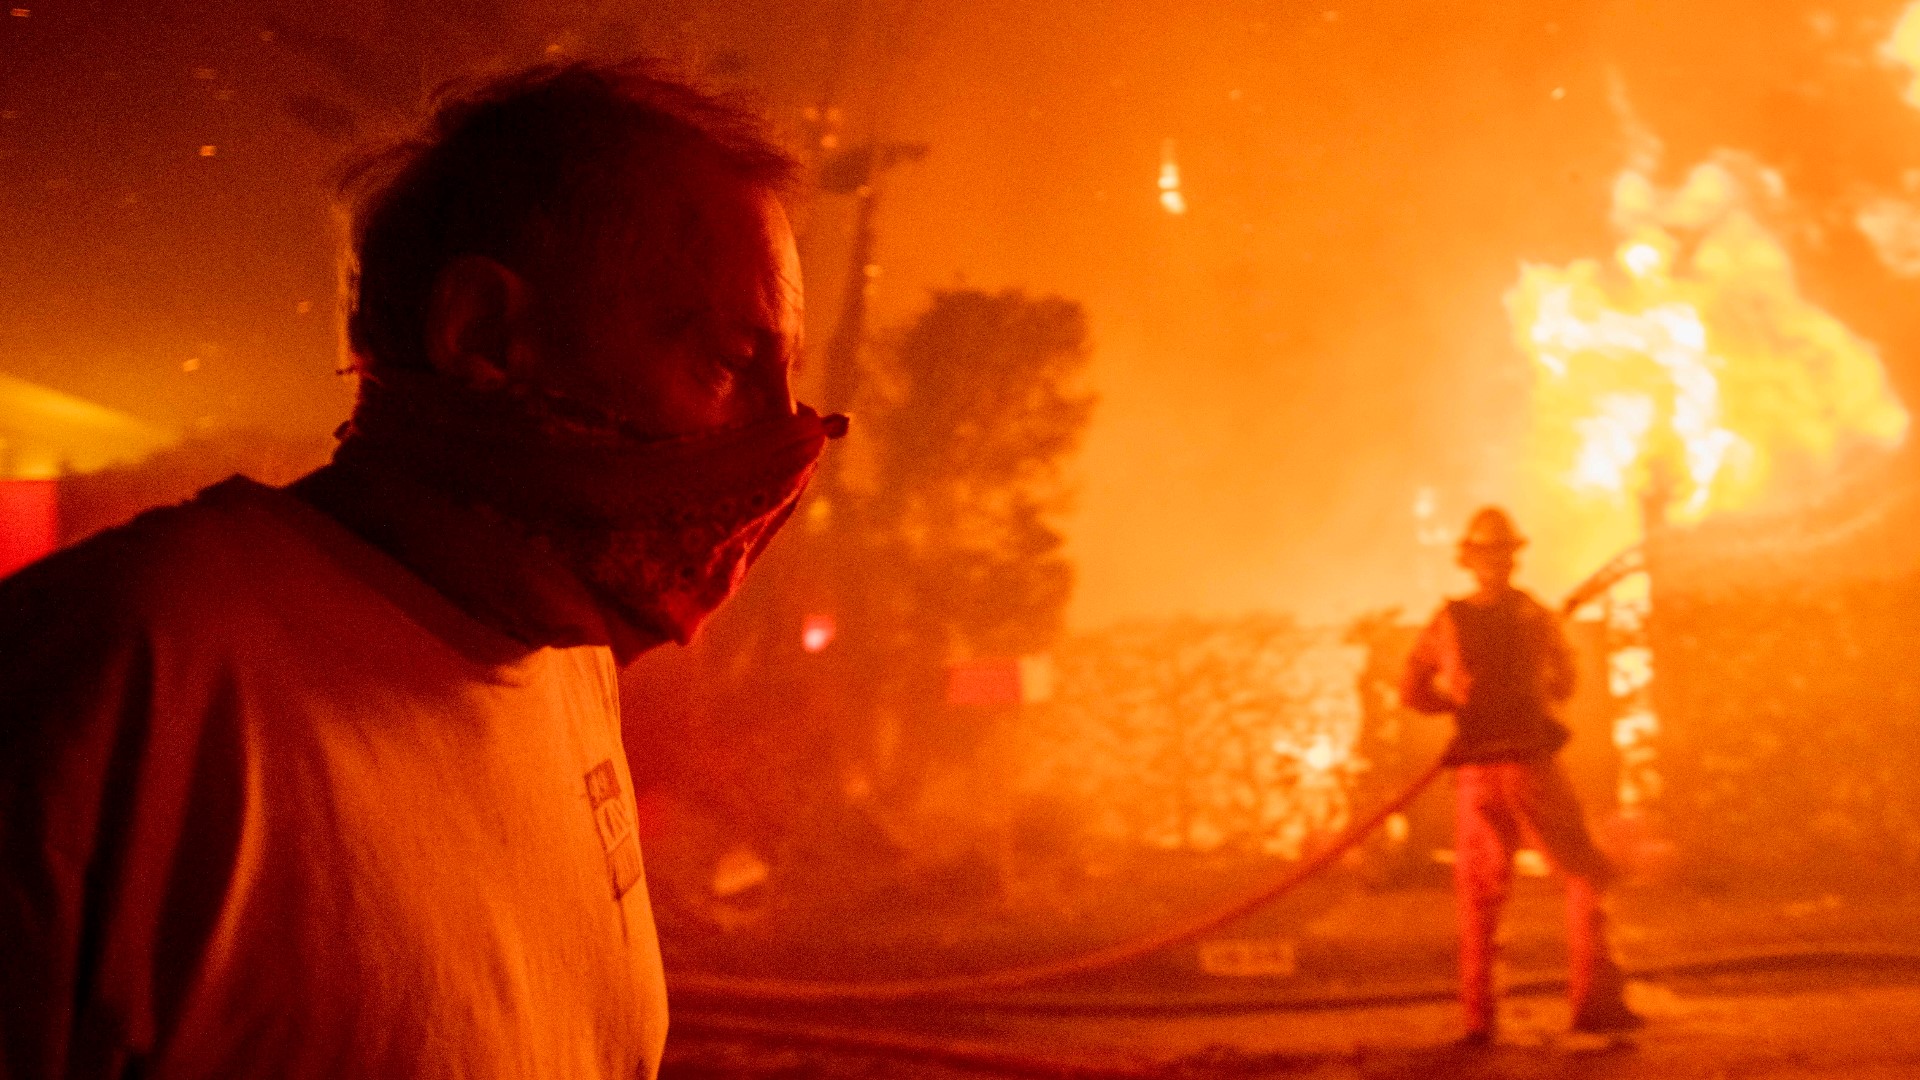 Firefighters battled the destructive Kincade Fire and Getty Fire on Monday, as others in Northern and Central California prepare for more PG&E shutoffs.